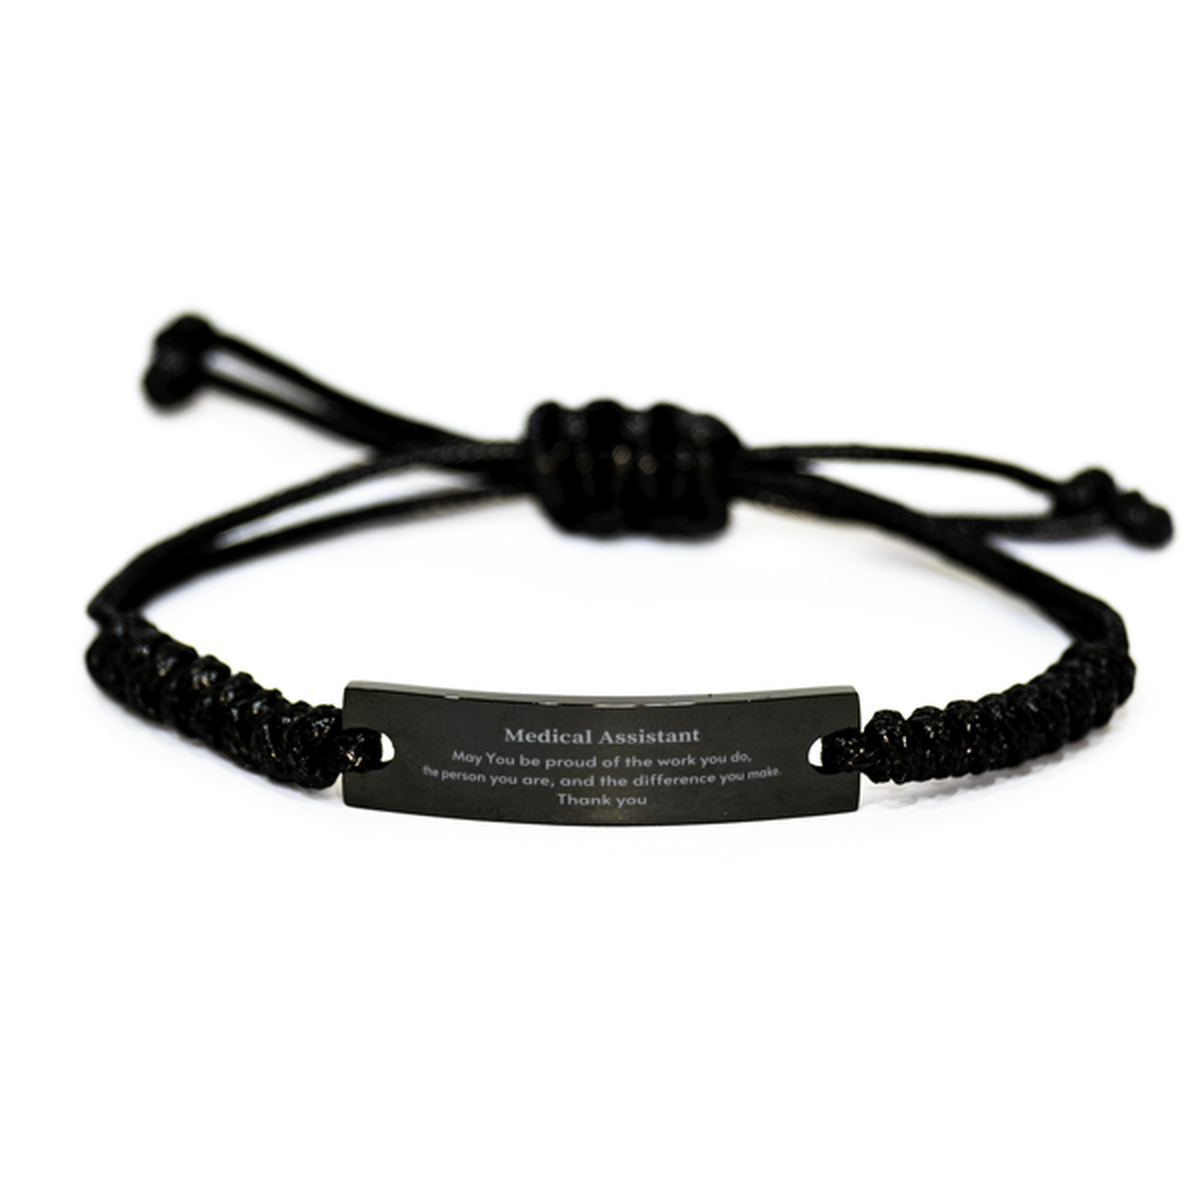 Heartwarming Black Rope Bracelet Retirement Coworkers Gifts for Medical Assistant, Medical Assistant May You be proud of the work you do, the person you are Gifts for Boss Men Women Friends